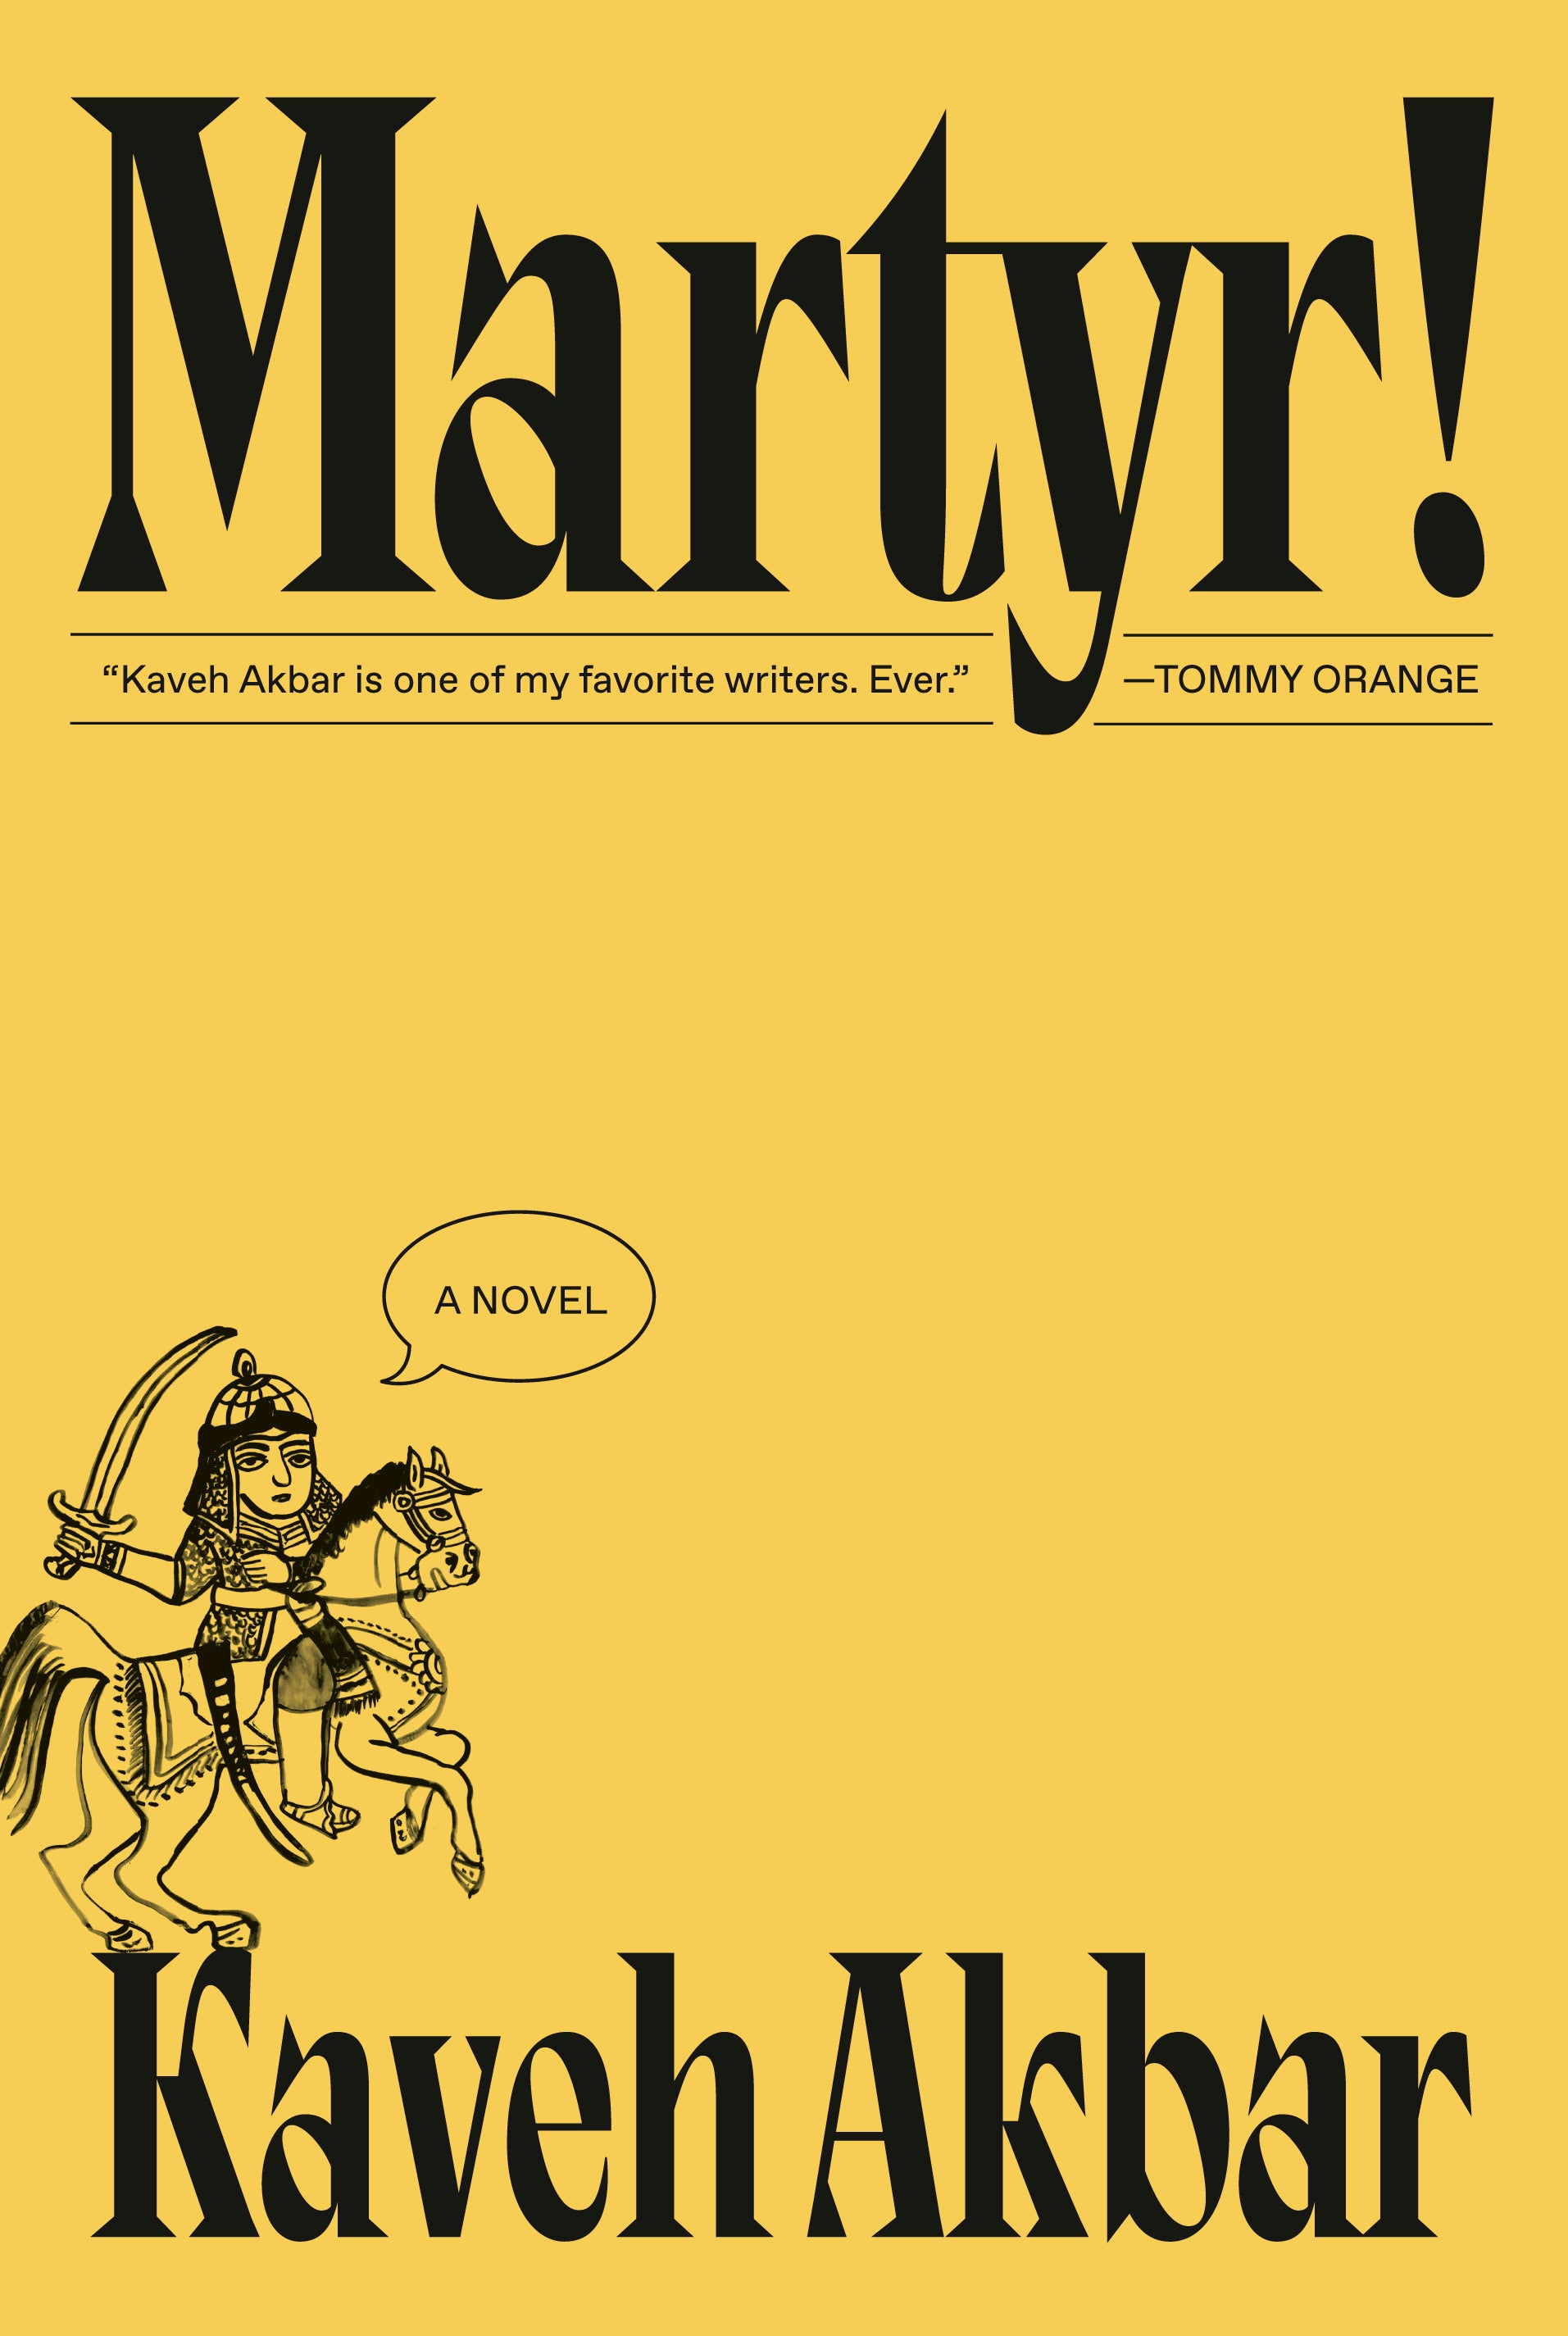 Book Review - Martyr